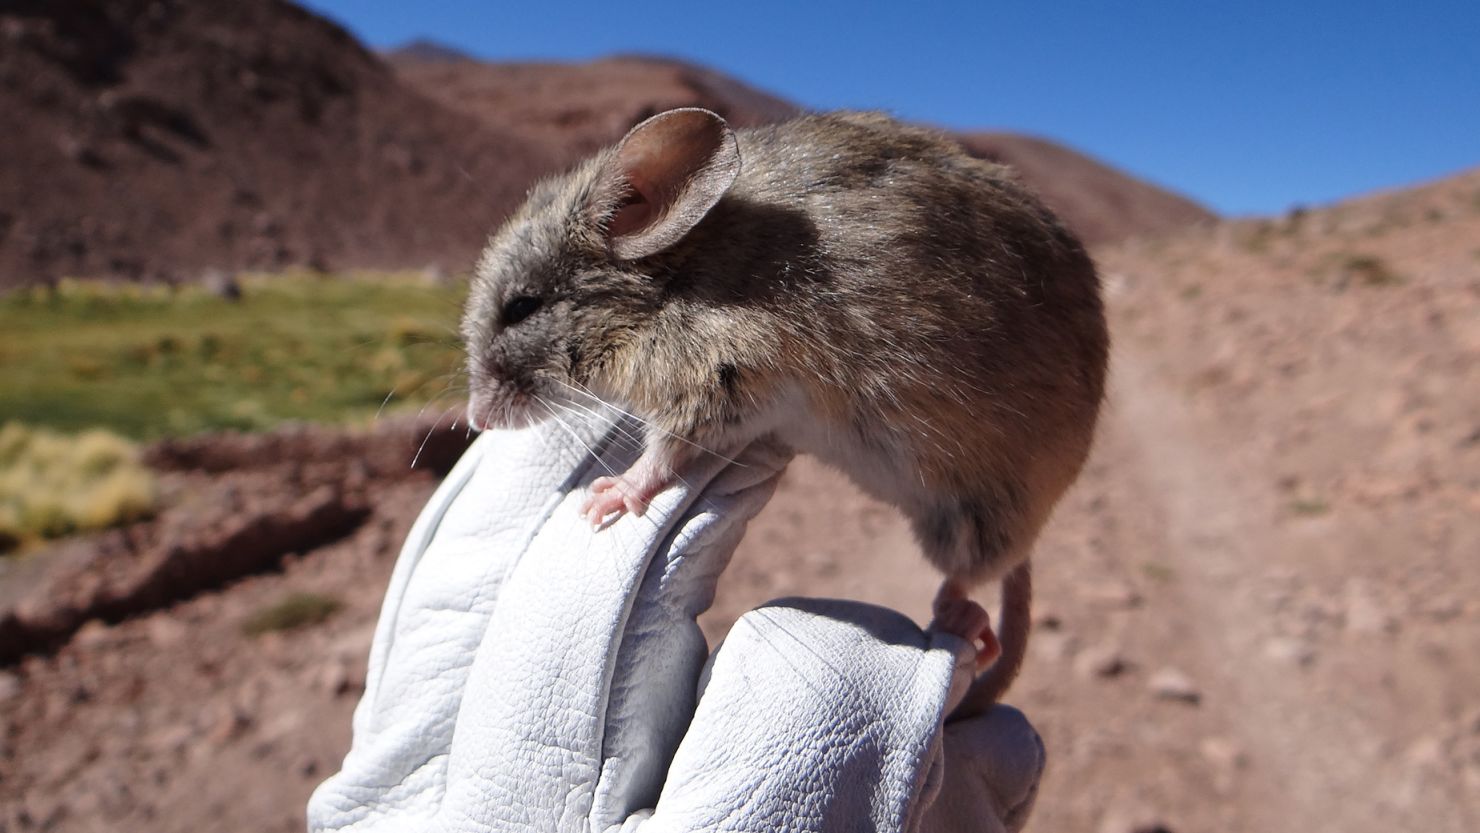 A species of leaf-eared mouse, called Phyllotis vaccarum, has surprised scientists by making the summits of the Andes mountains its home. The mouse holds the record for the highest living mammal.